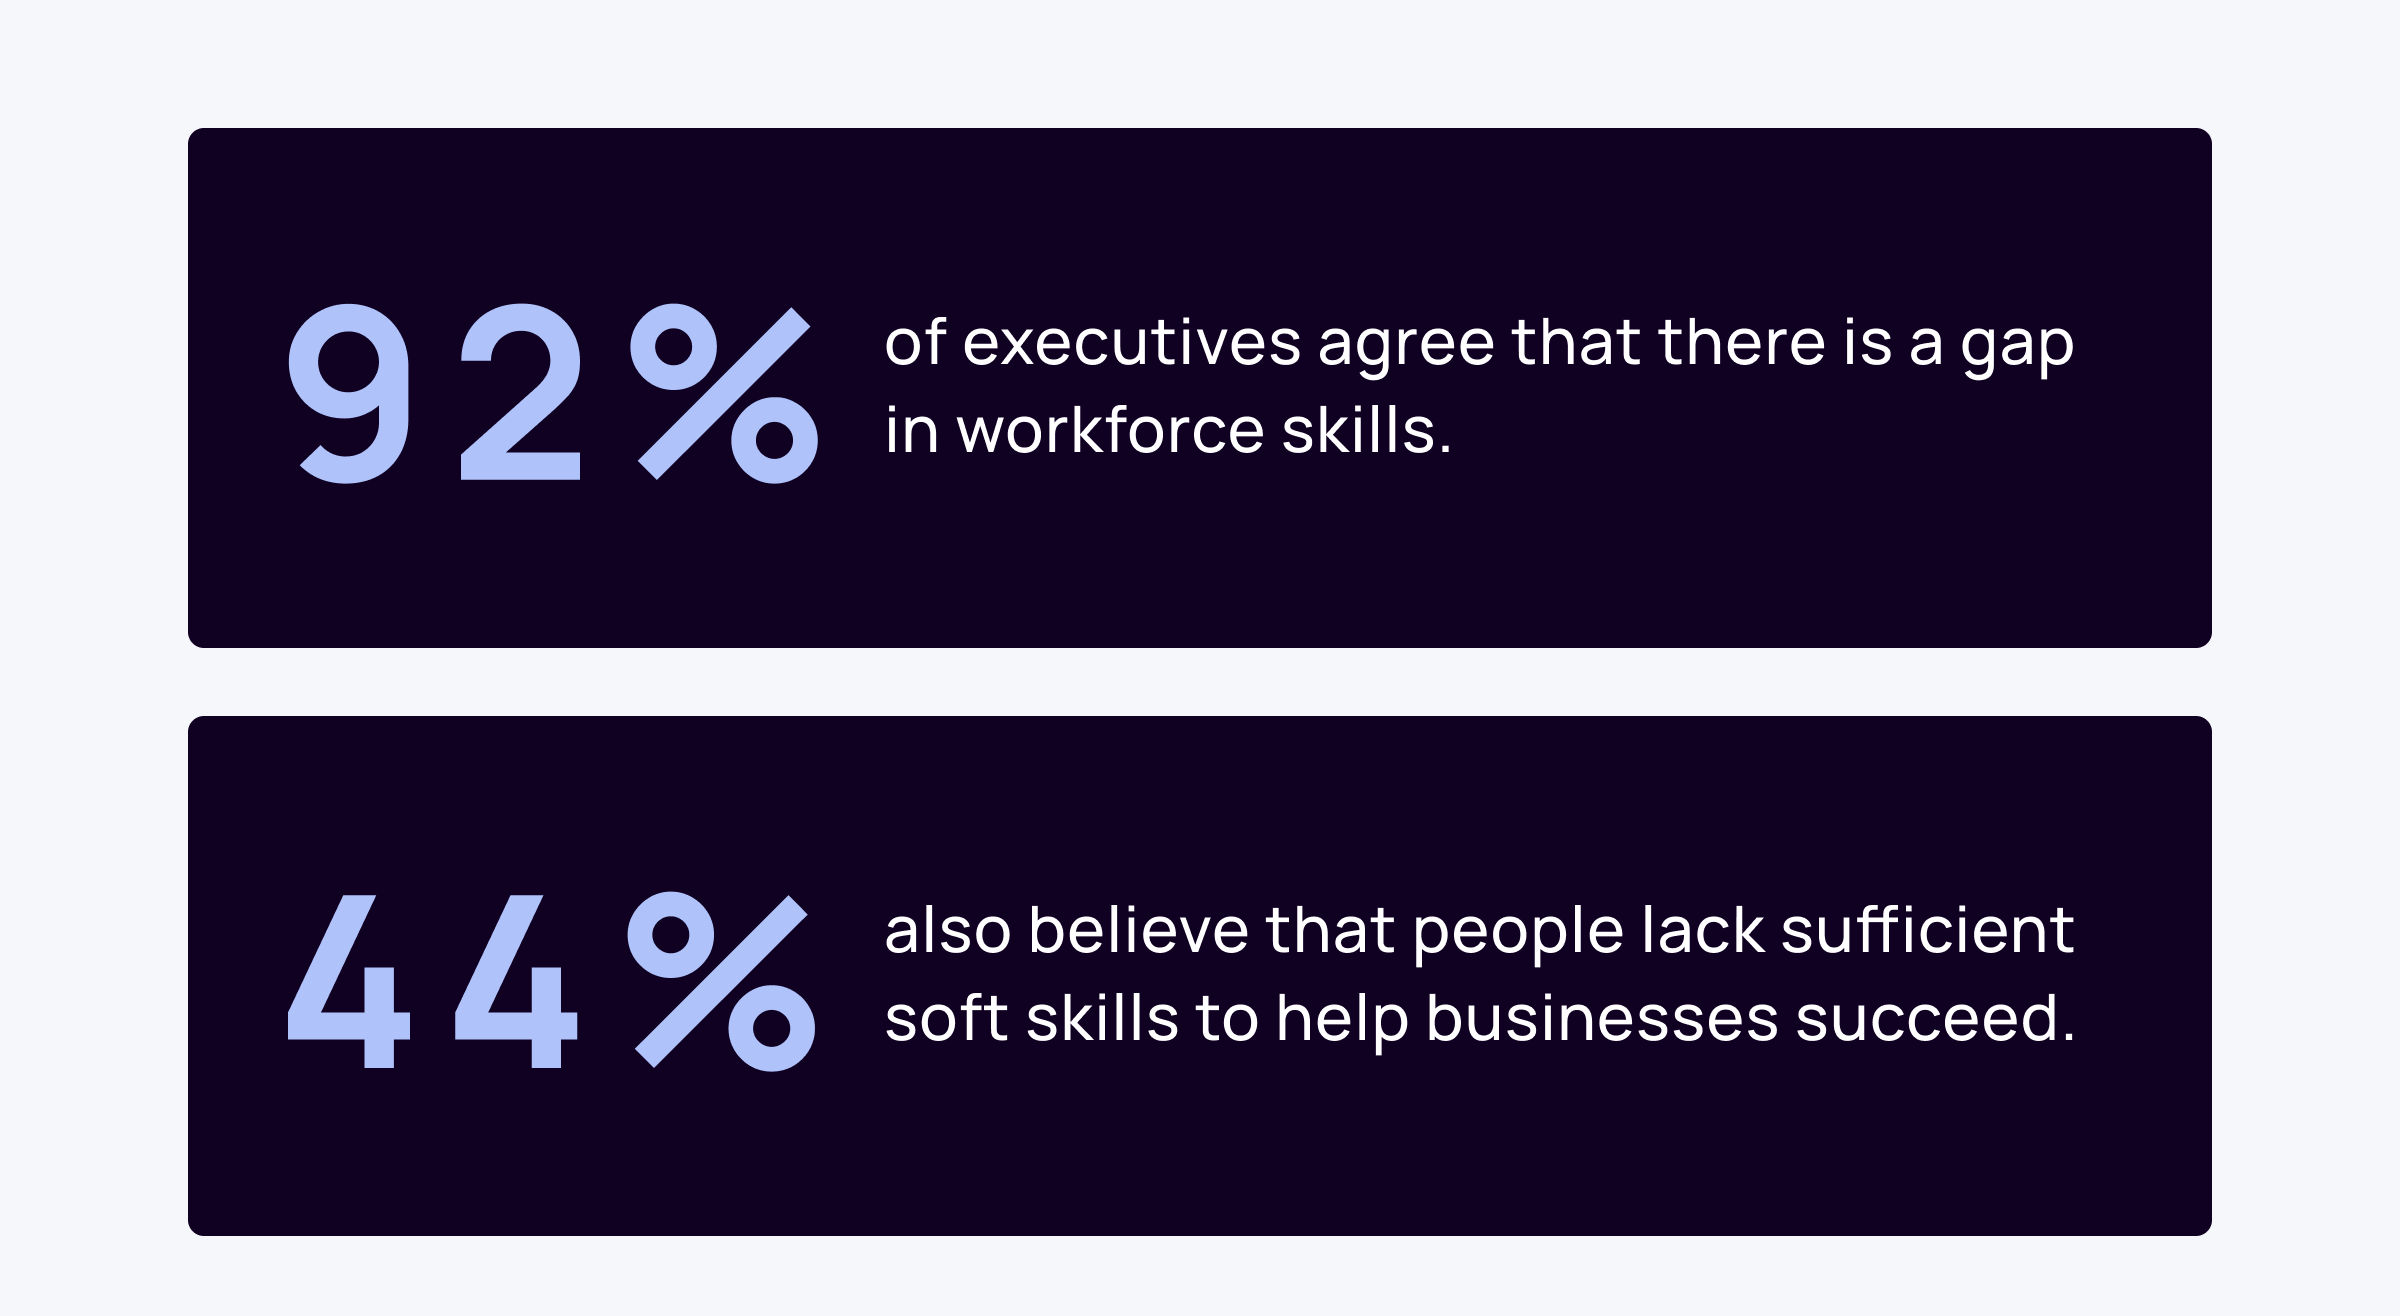 Two block which includes two stats. One of which is 92% of executives agree that there is a gap in workforce skills and 44% also believe that people lack sufficient soft skills to help businesses succeed.